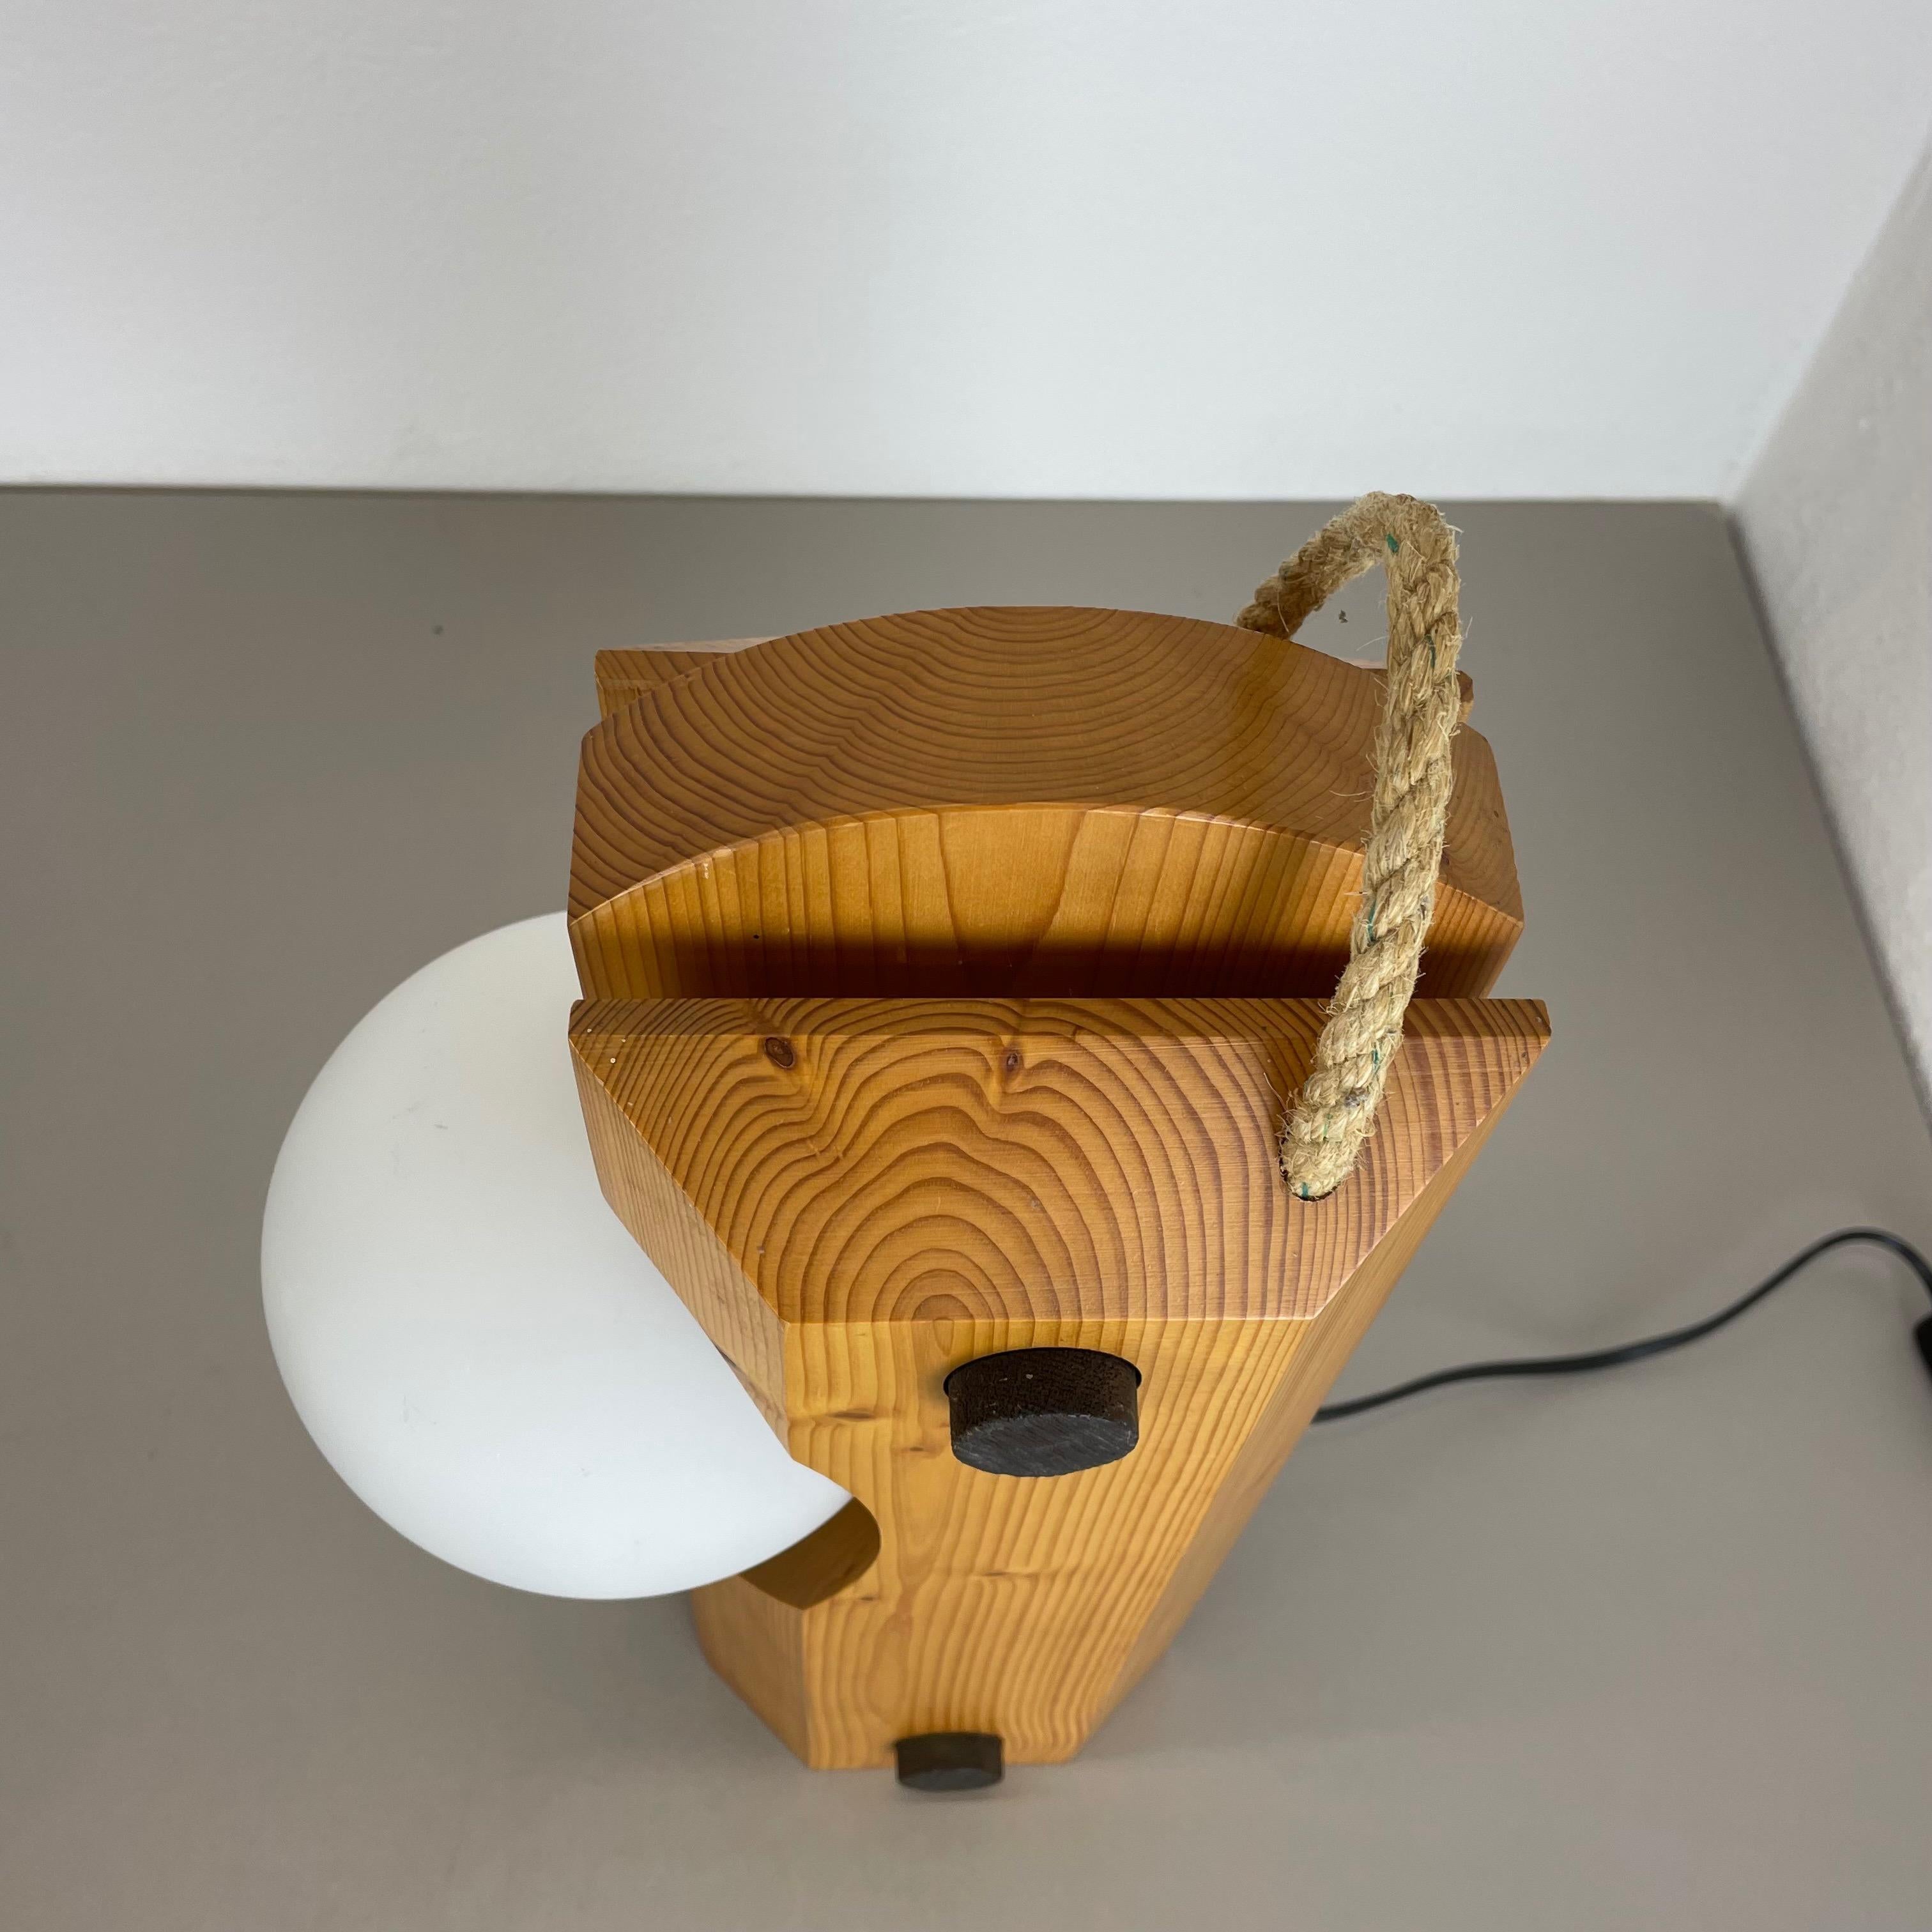 Large Organic Sculptural PINE Wooden Table Light by Temde Lights, Germany 1970s For Sale 7